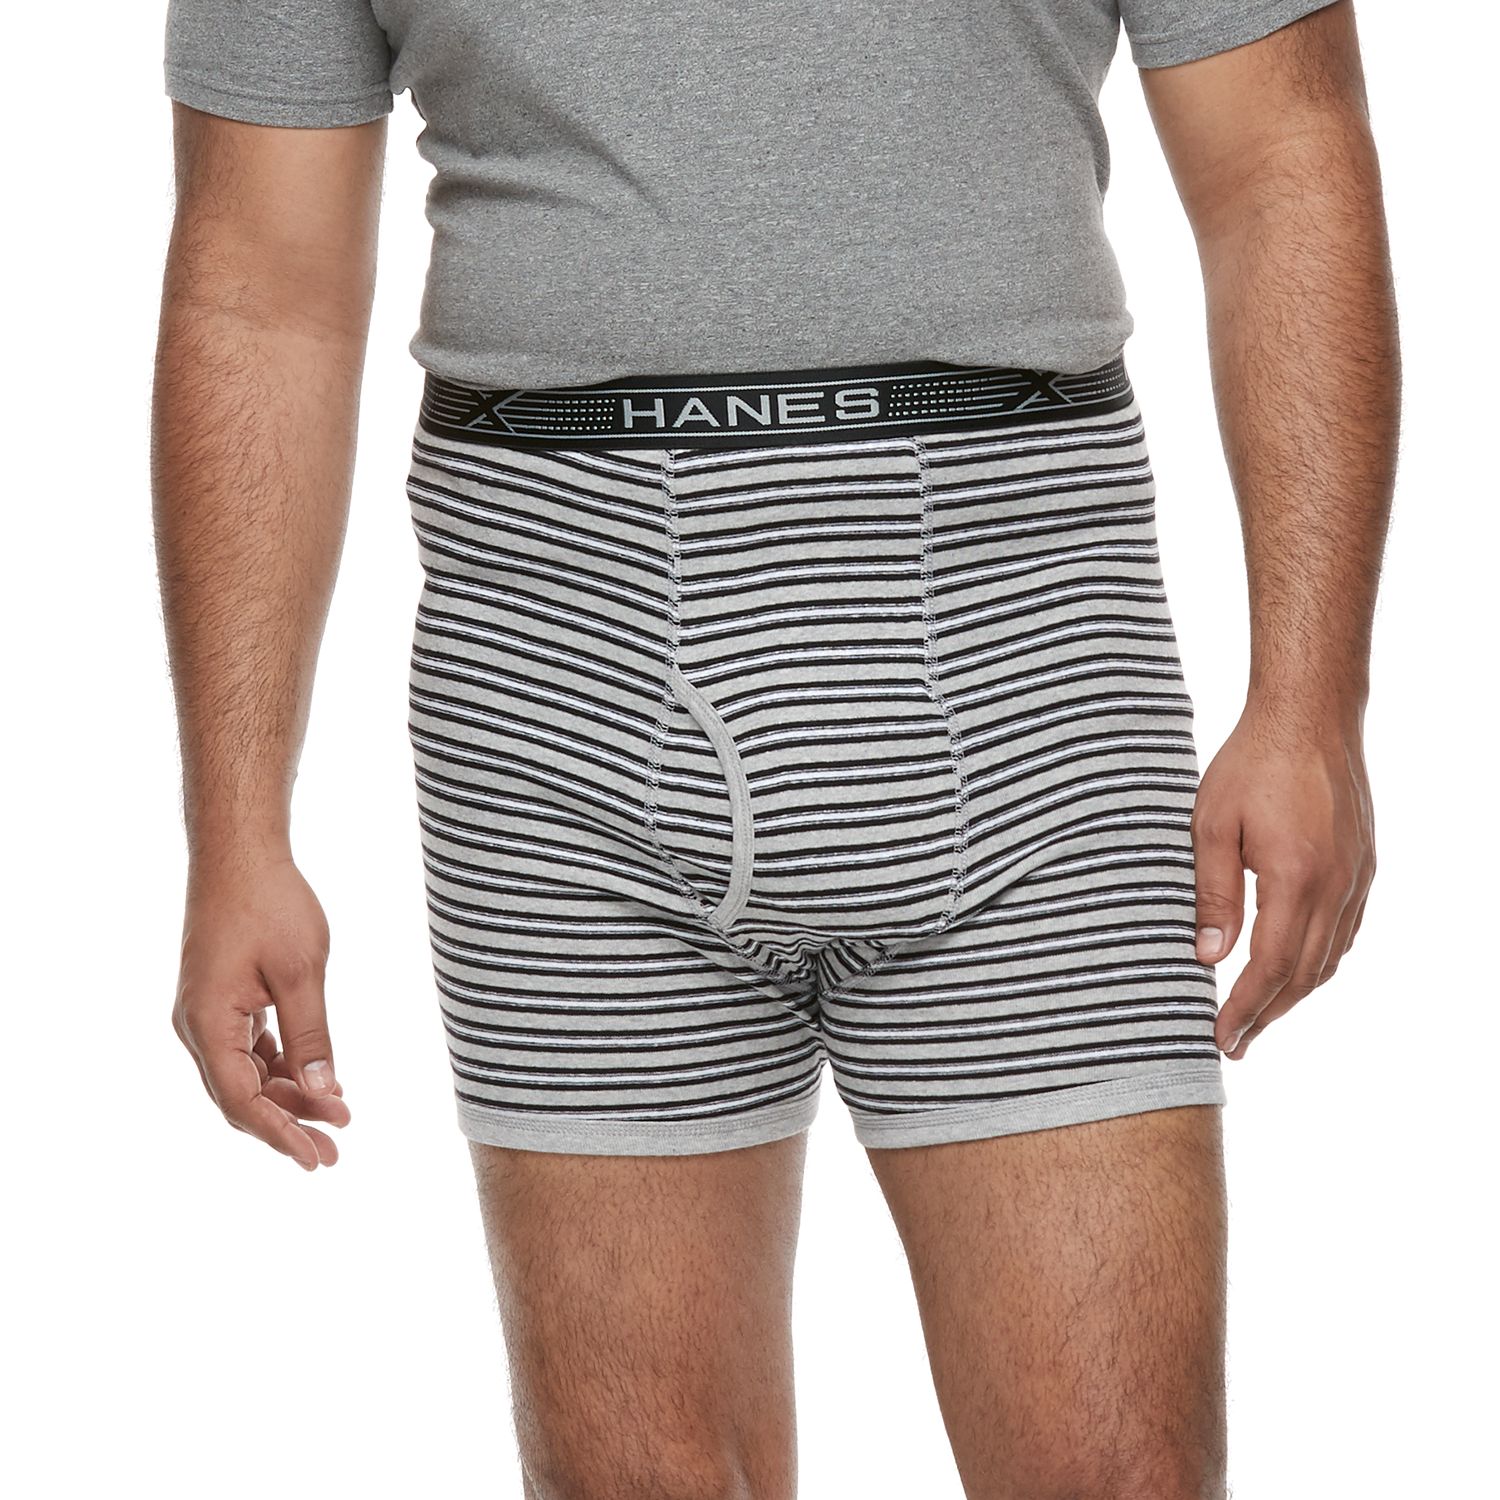 Image for Hanes Big & Tall 3-pack X-Temp Boxer Briefs at Kohl's.